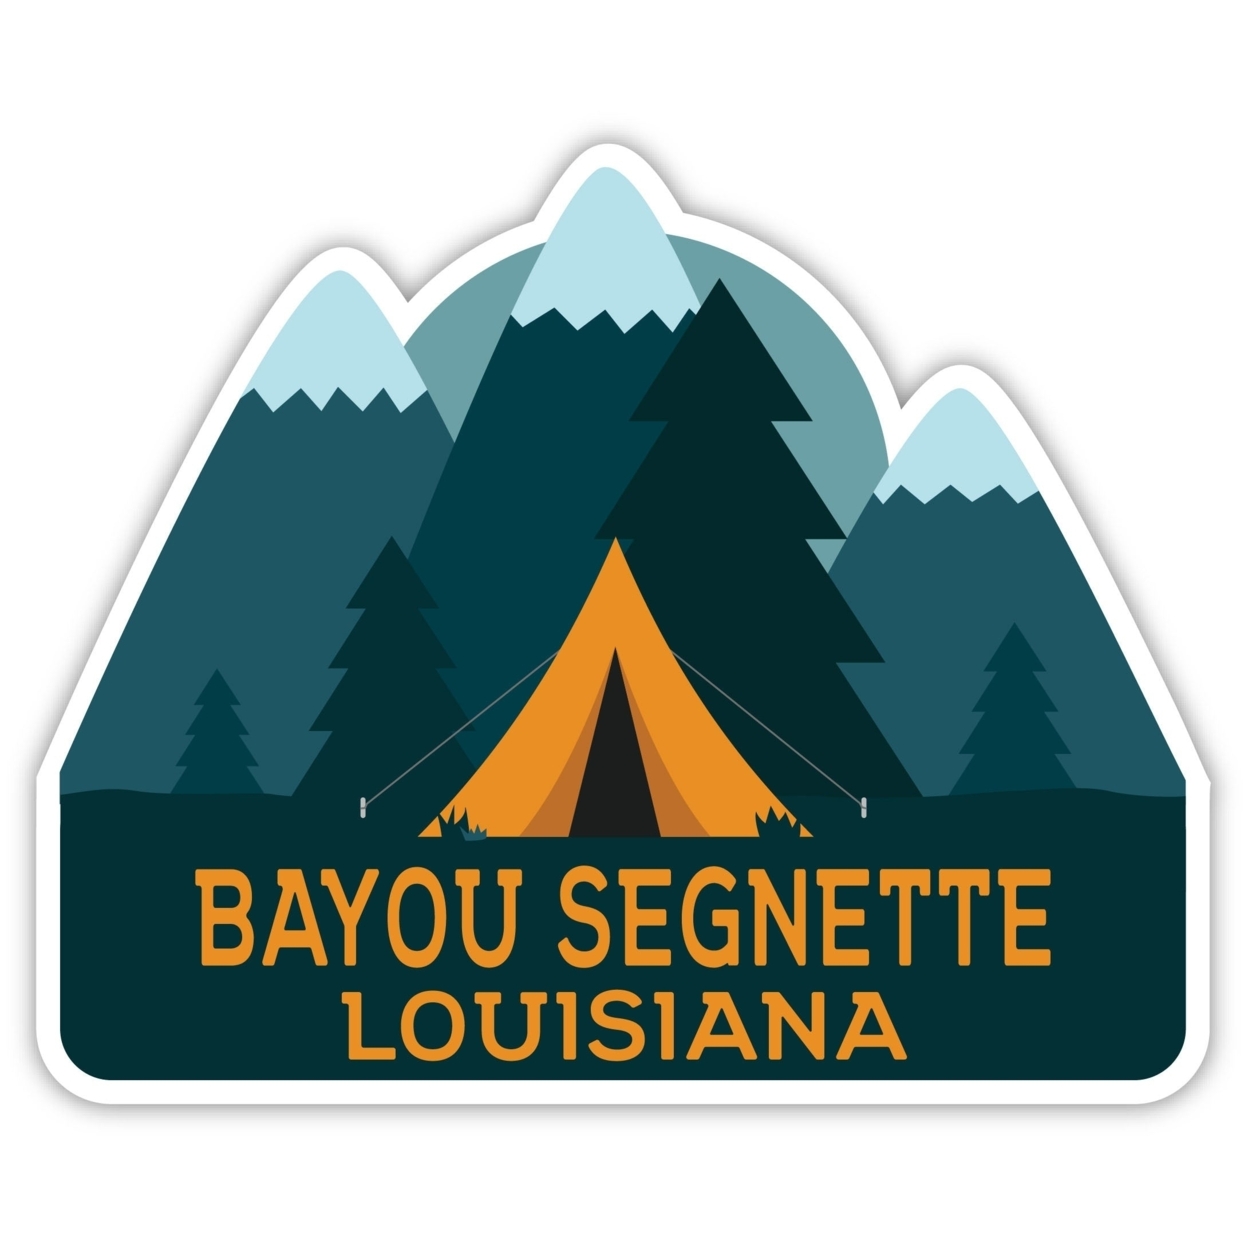 Bayou Segnette Louisiana Souvenir Decorative Stickers (Choose Theme And Size) - 4-Pack, 10-Inch, Tent